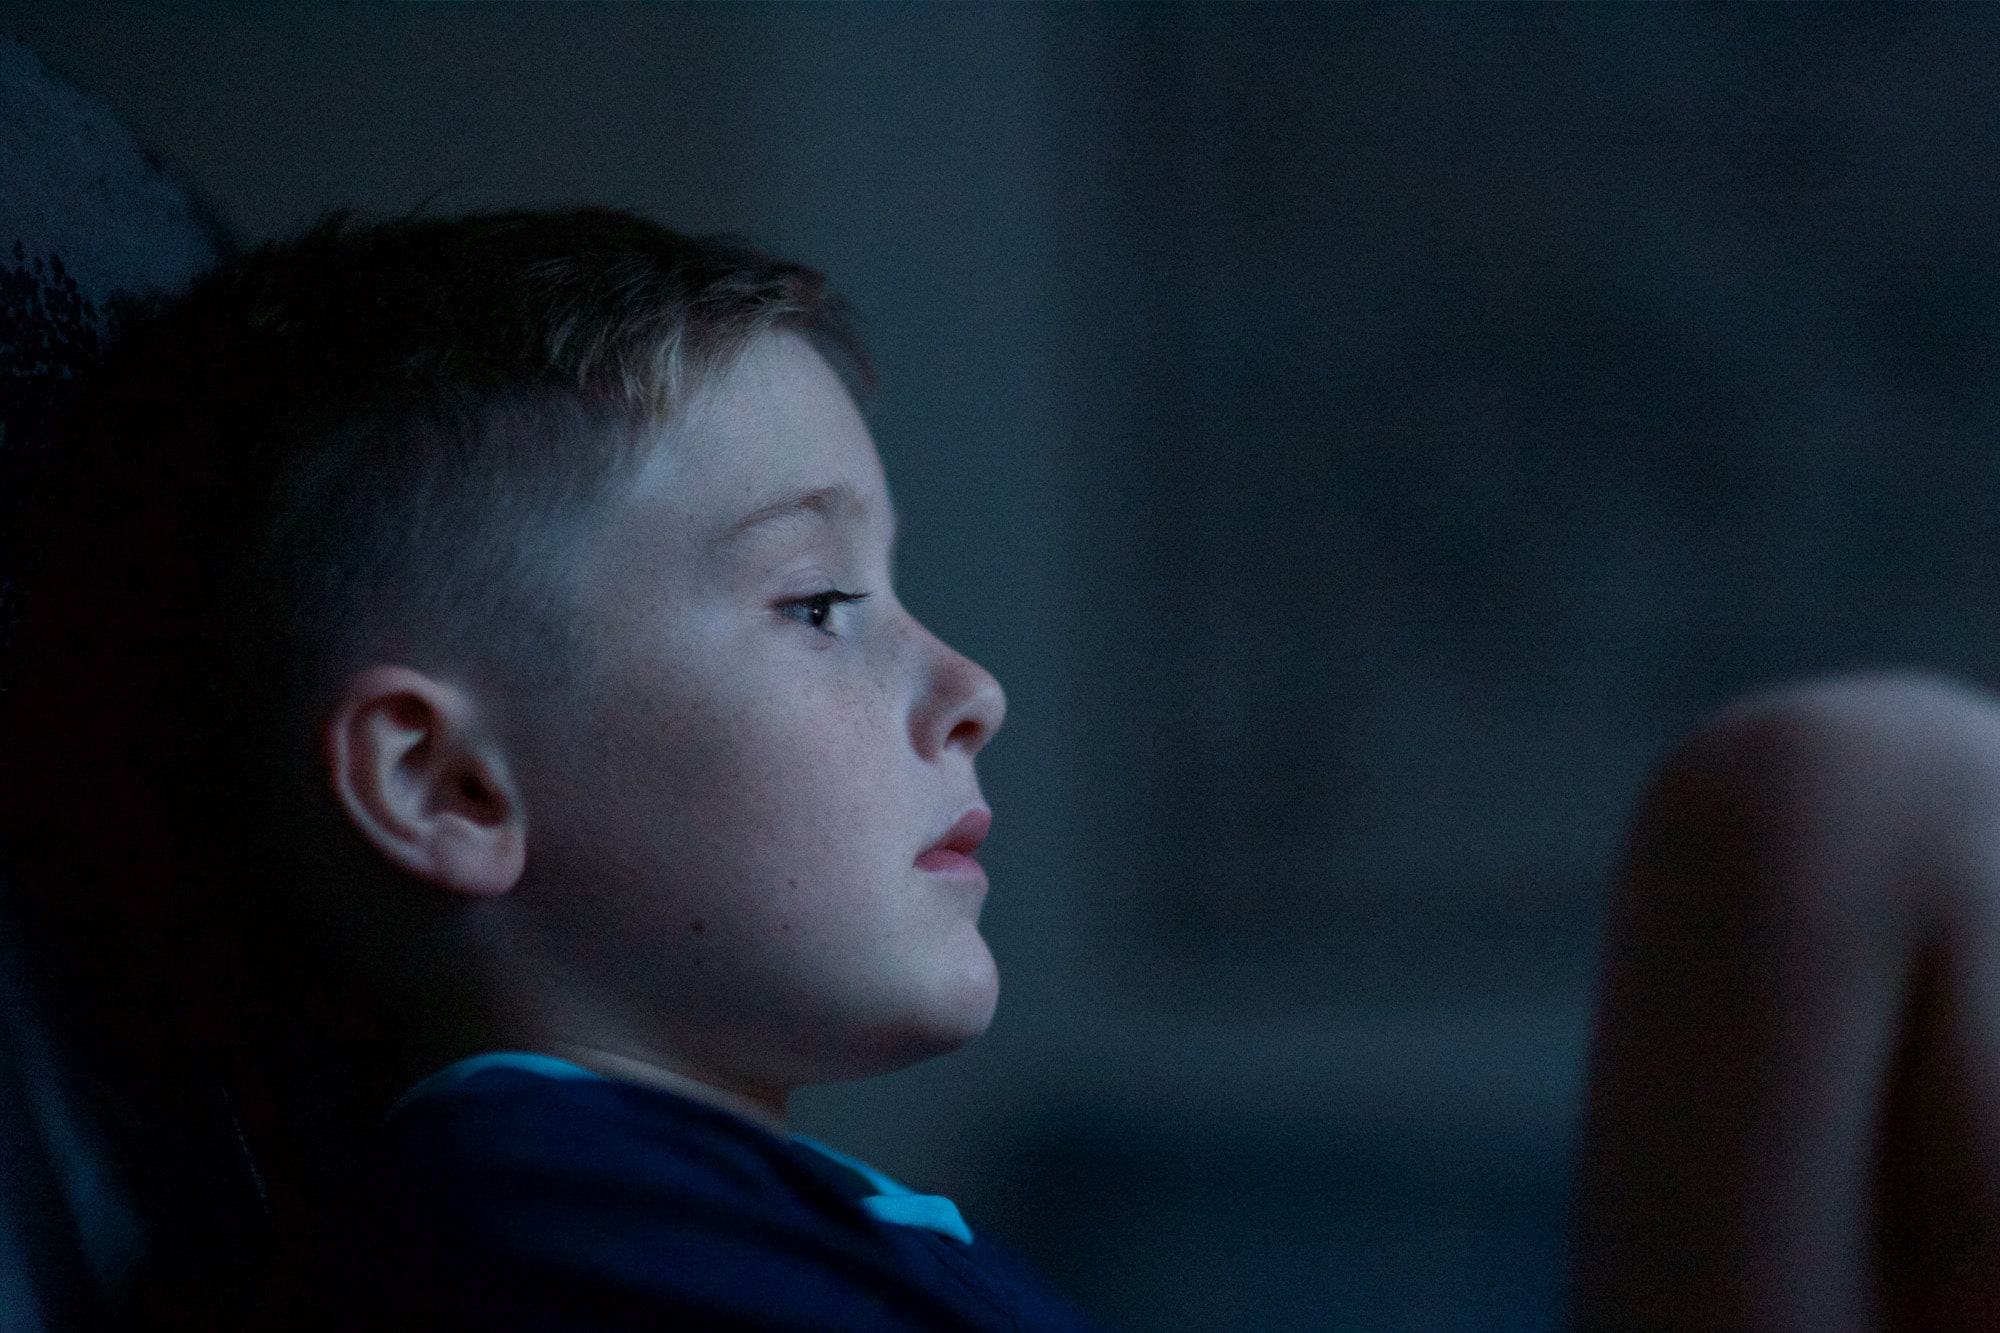 A melancholy young boy staring off into space in a darkened room